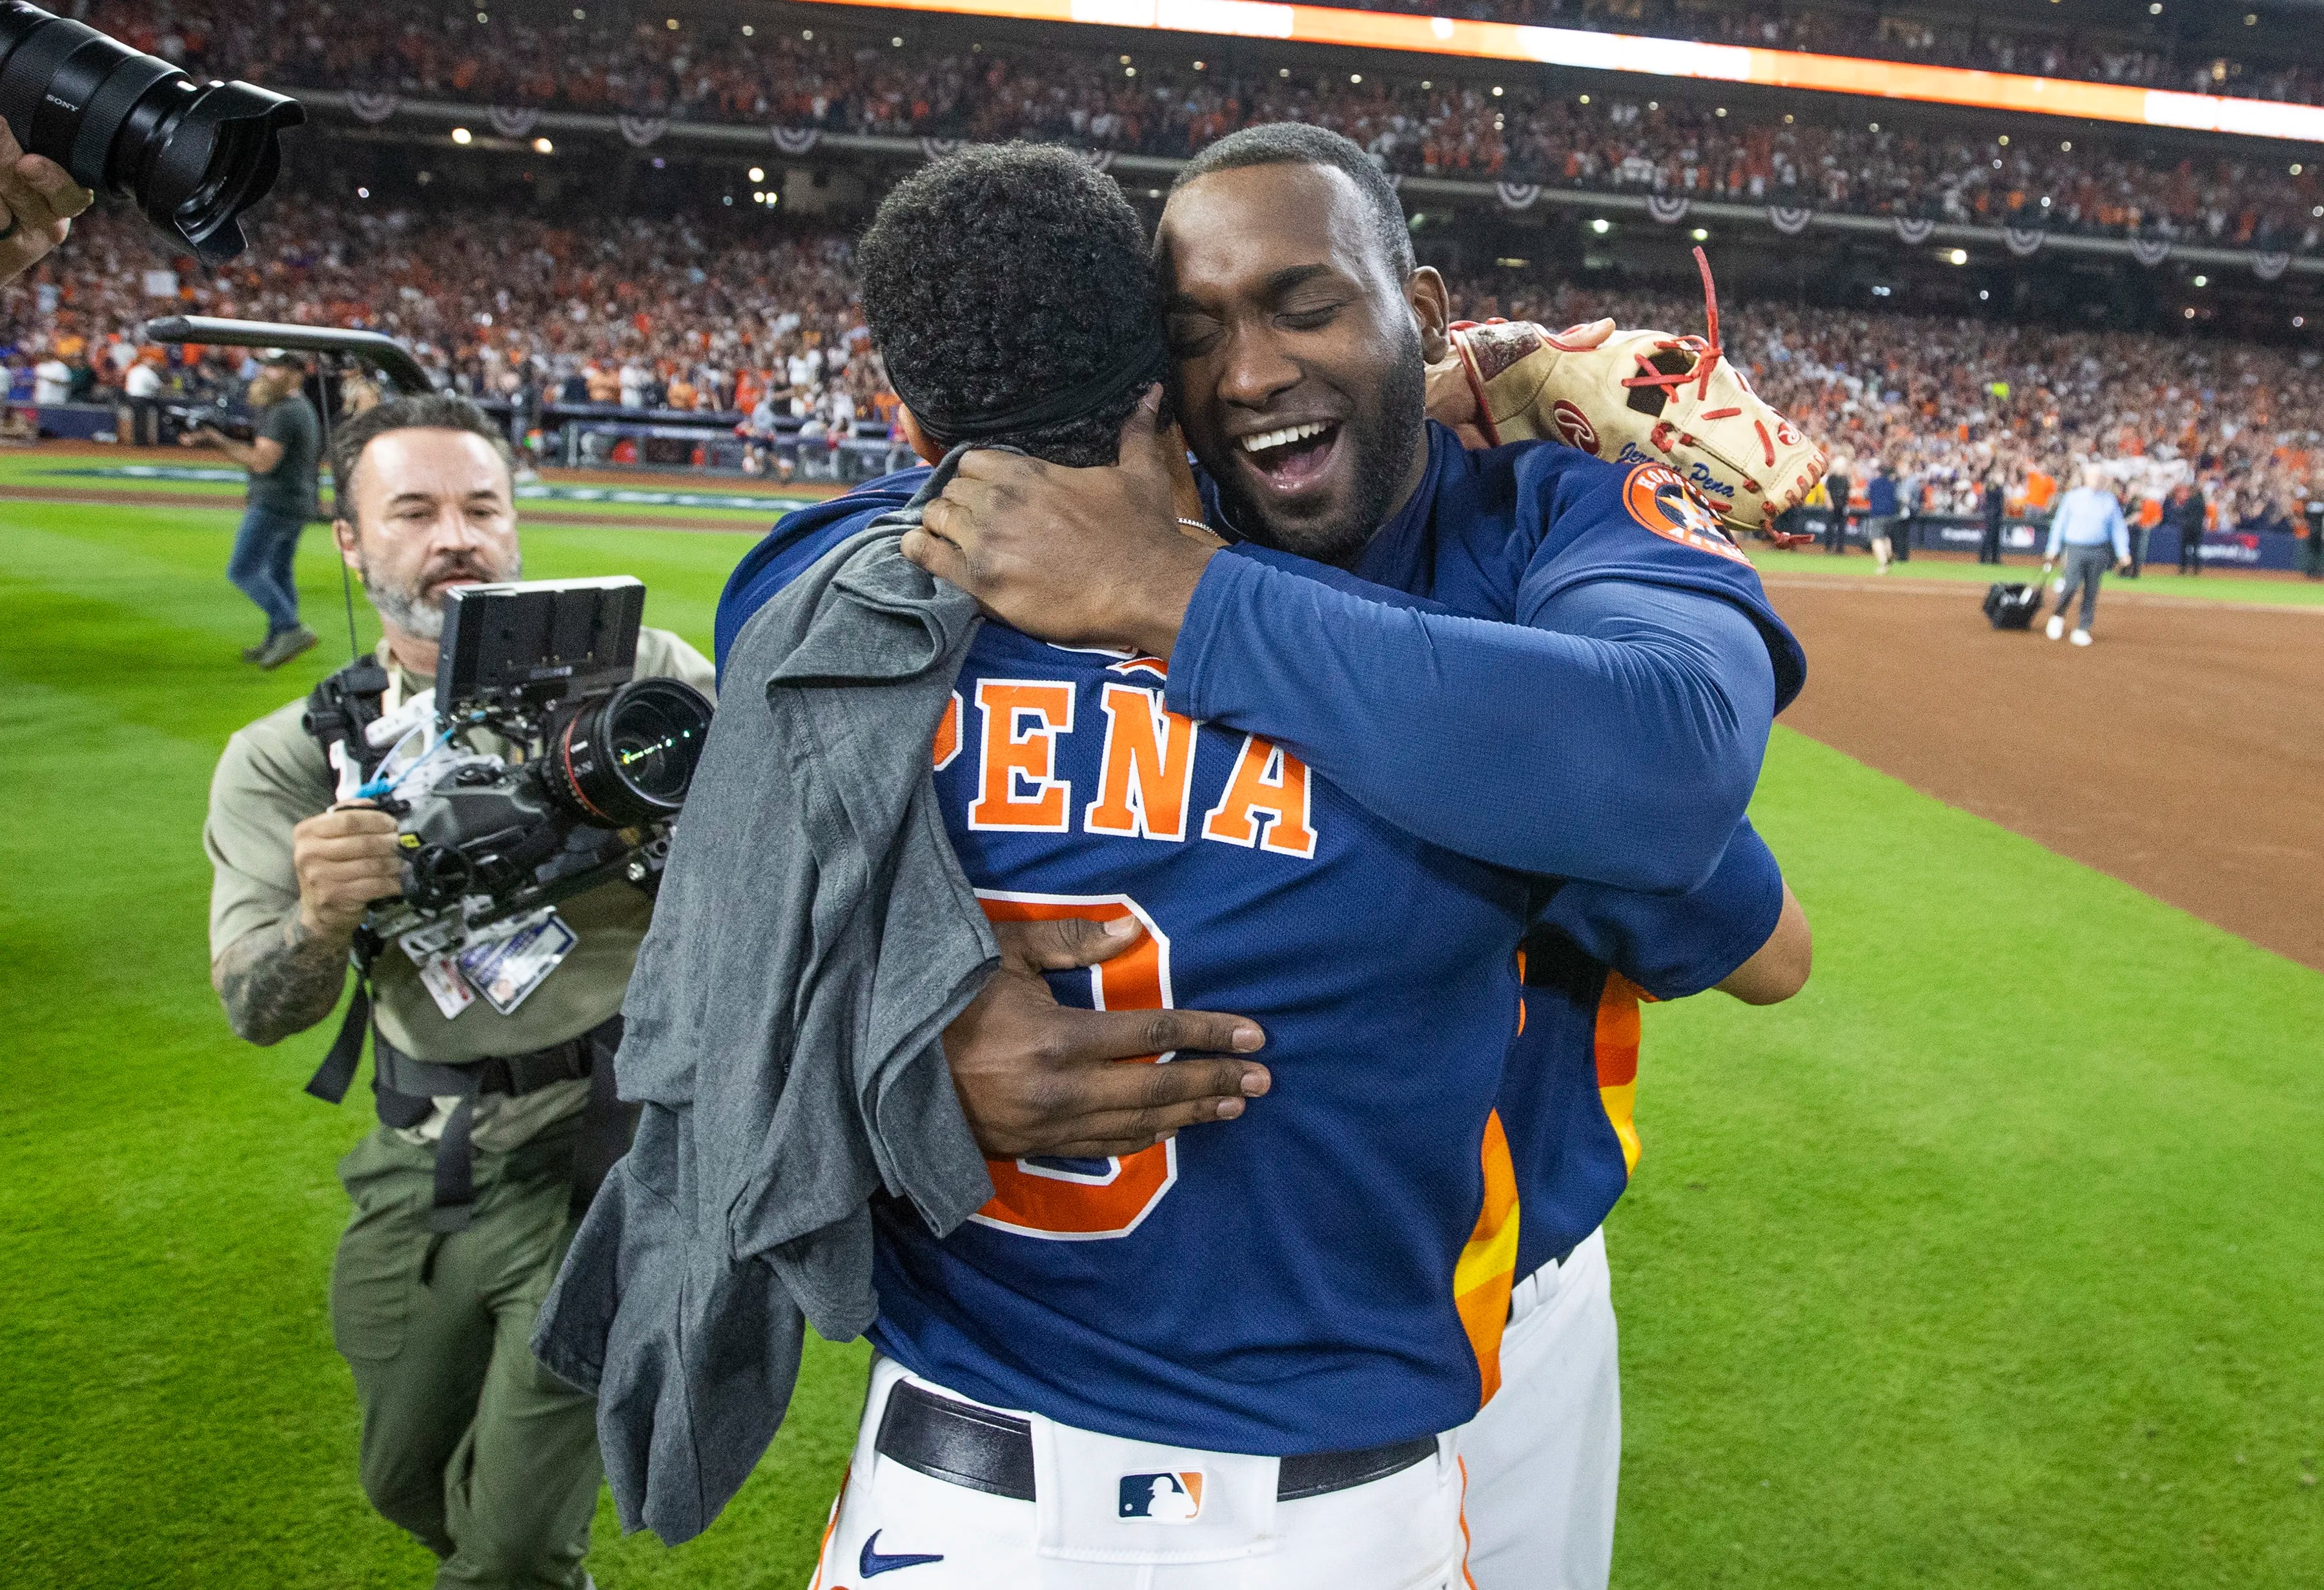 See images from the Phillies' loss to the Astros to end the World